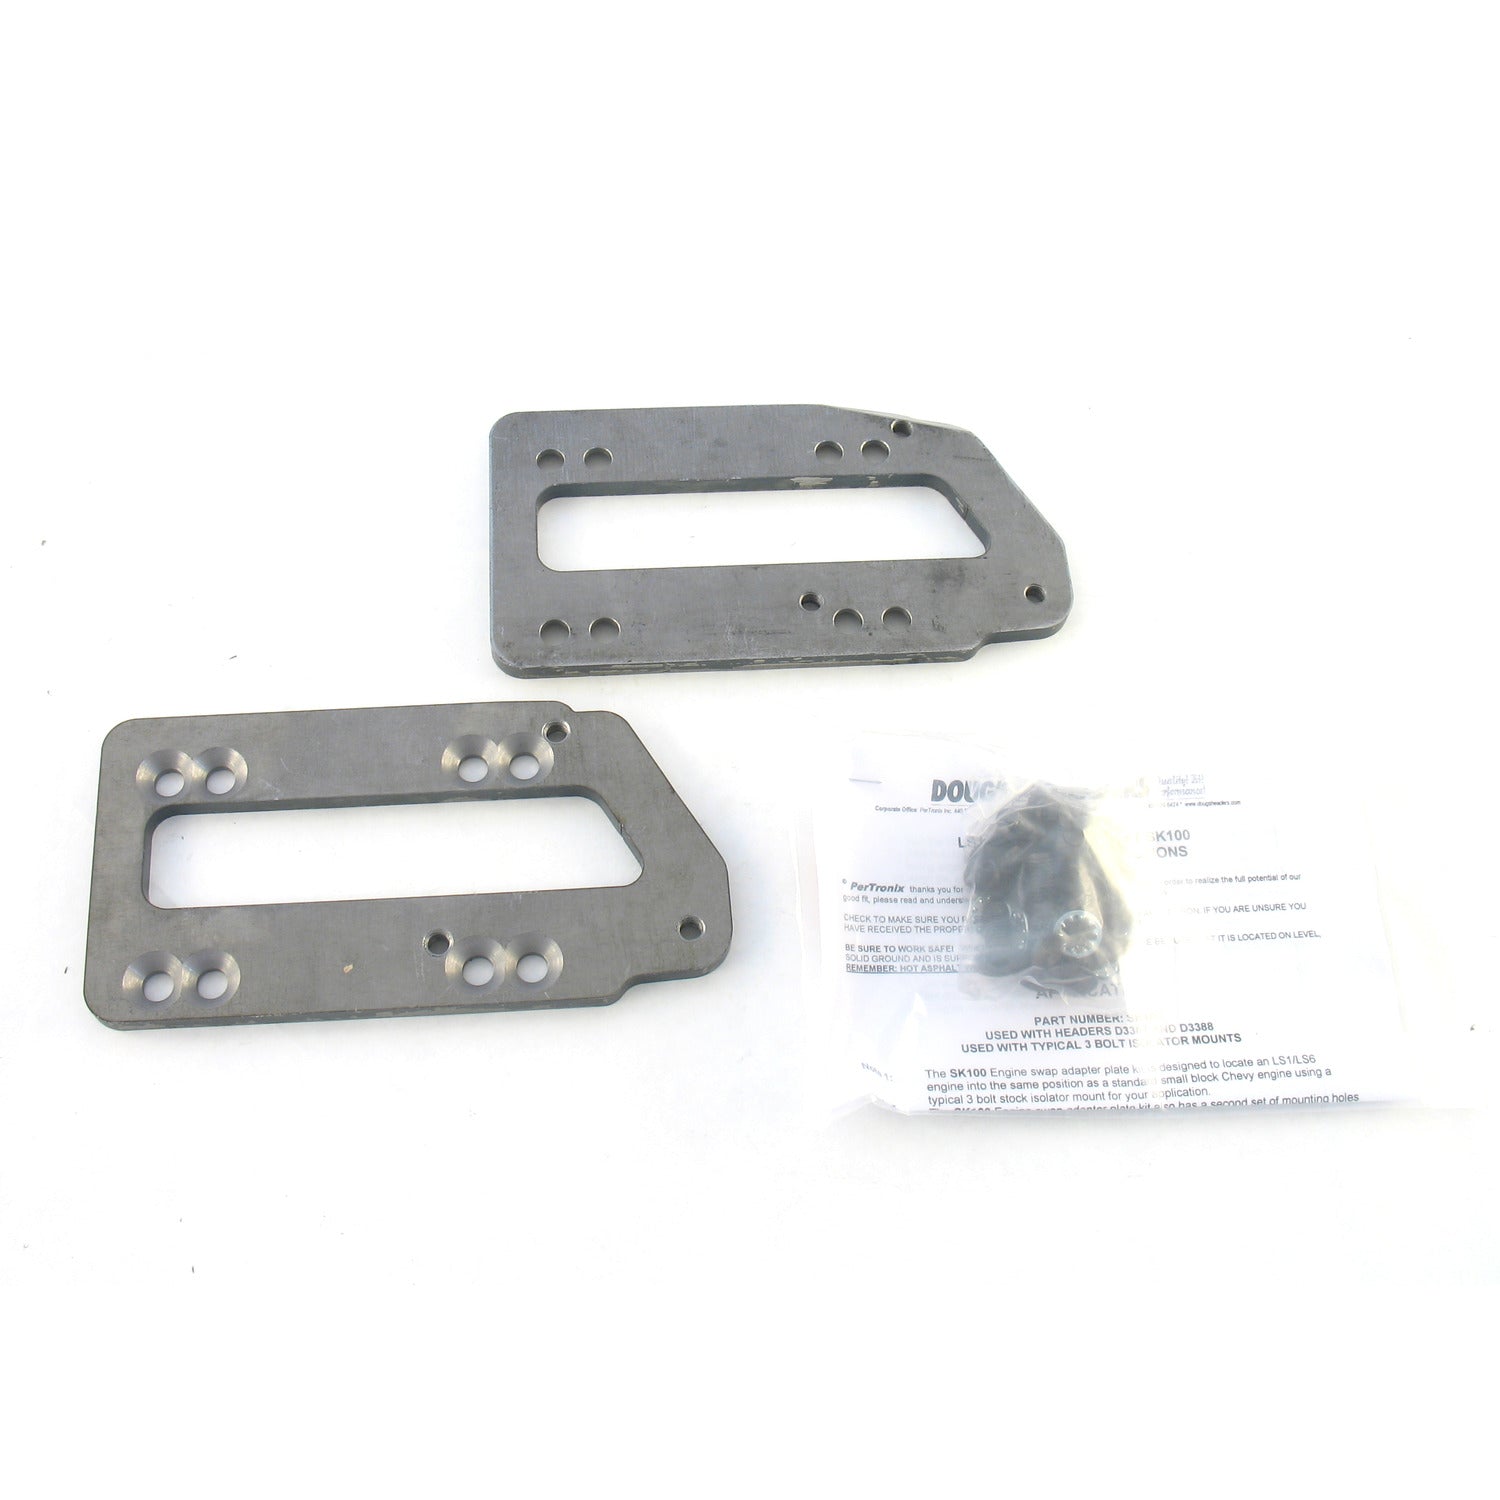 Doug's Headers SK100 Motor Mount Adaptor Plate Kit for LS1/LS6 GM engines into 67-81 Camaro 64-72 Chevelle